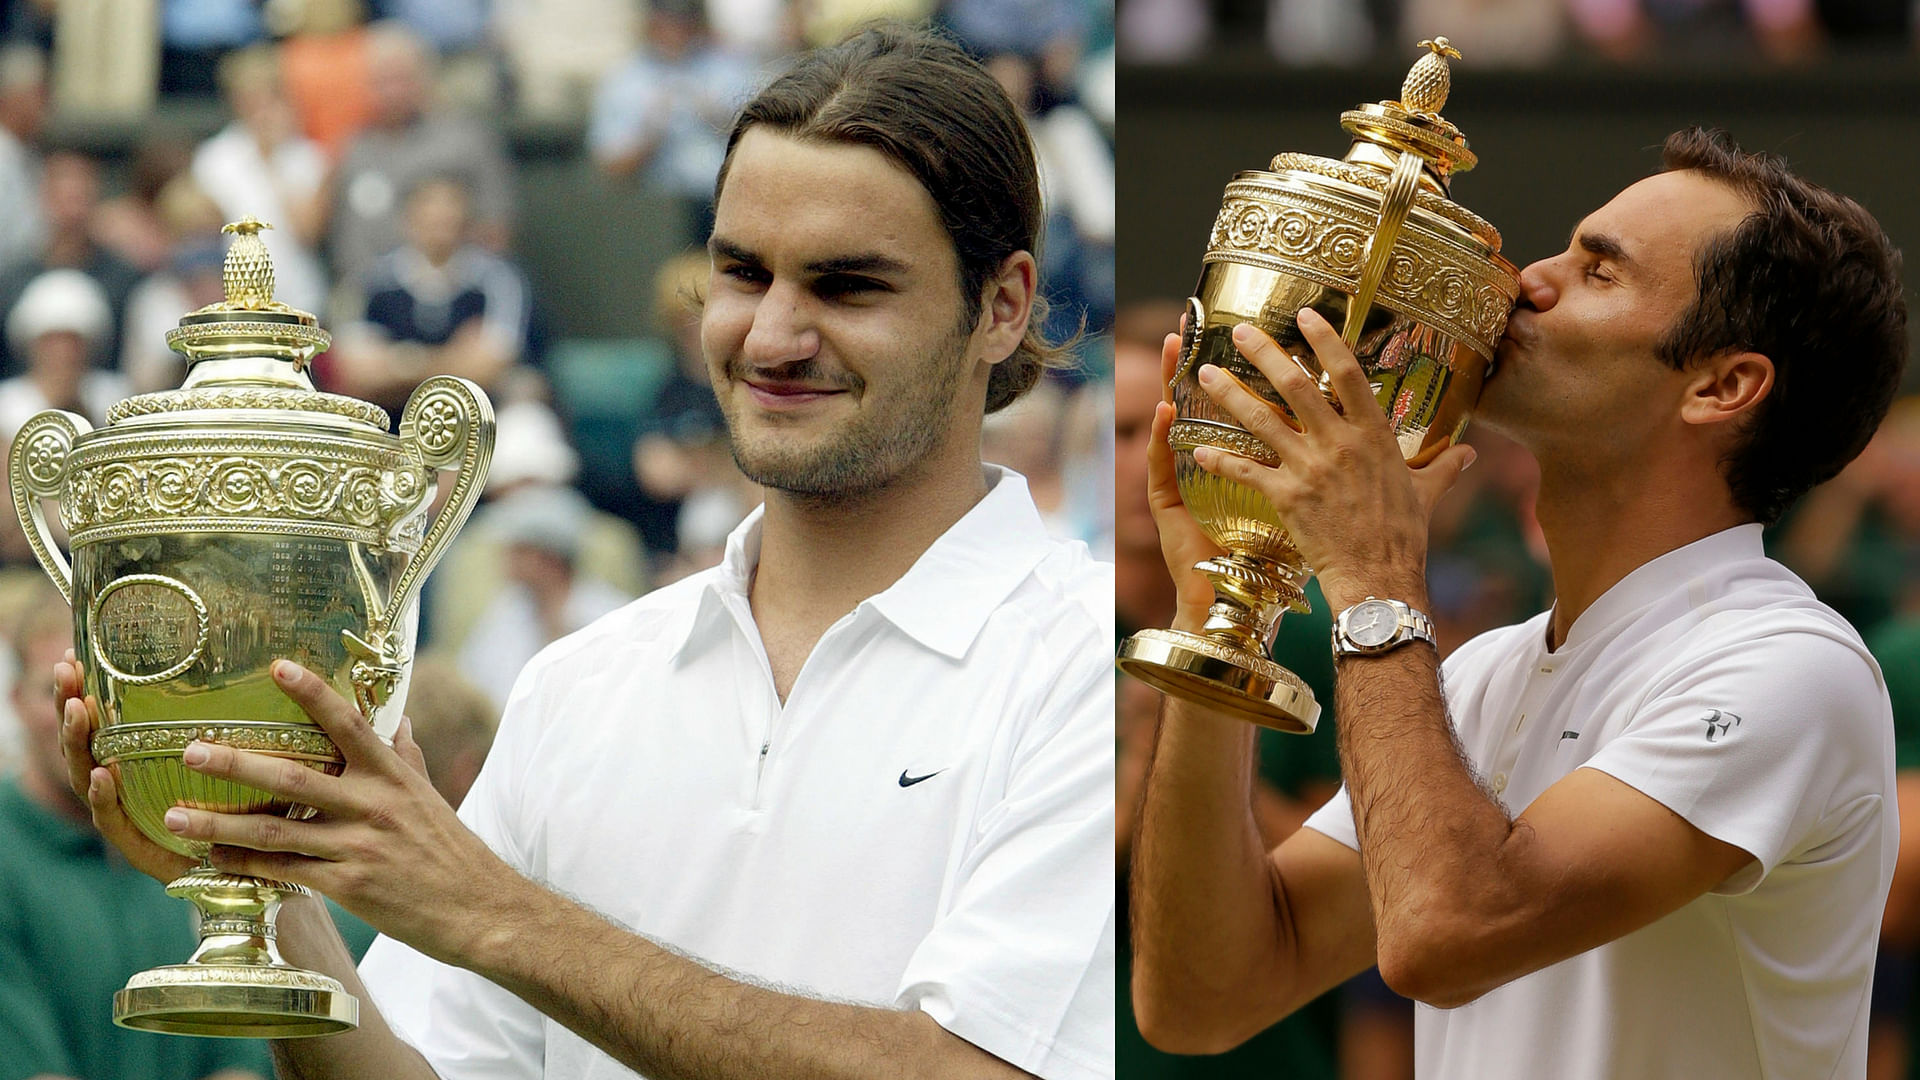 15 years ago, Roger Federer won his maiden Grand Slam trophy at the Wimbledon in 2003. He will be defending the title this year.